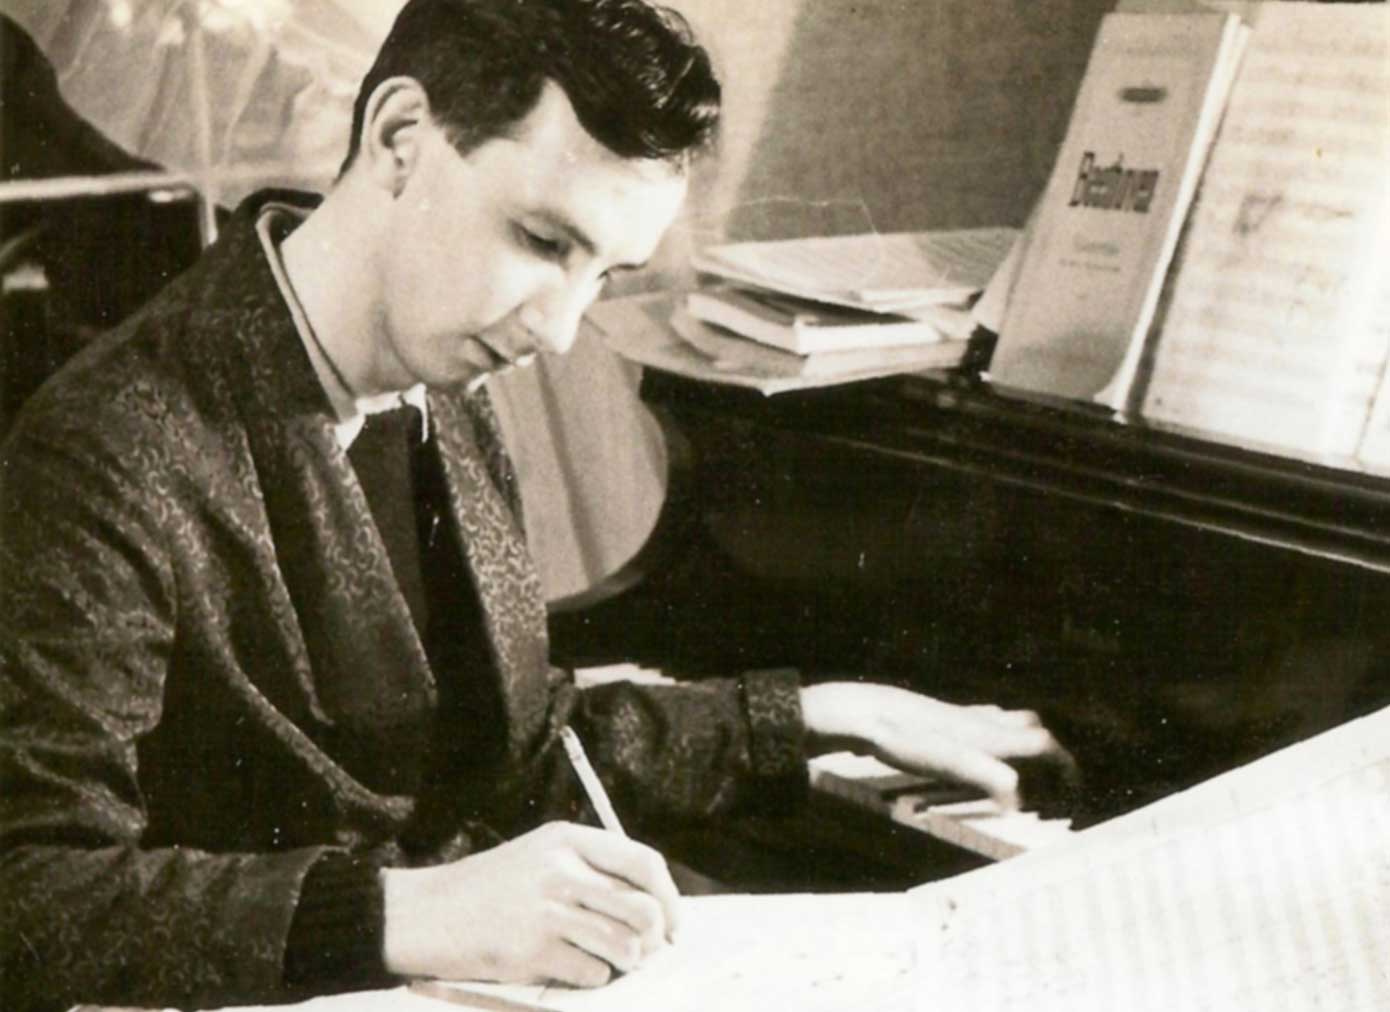 25-year-old Sauter working on a music score